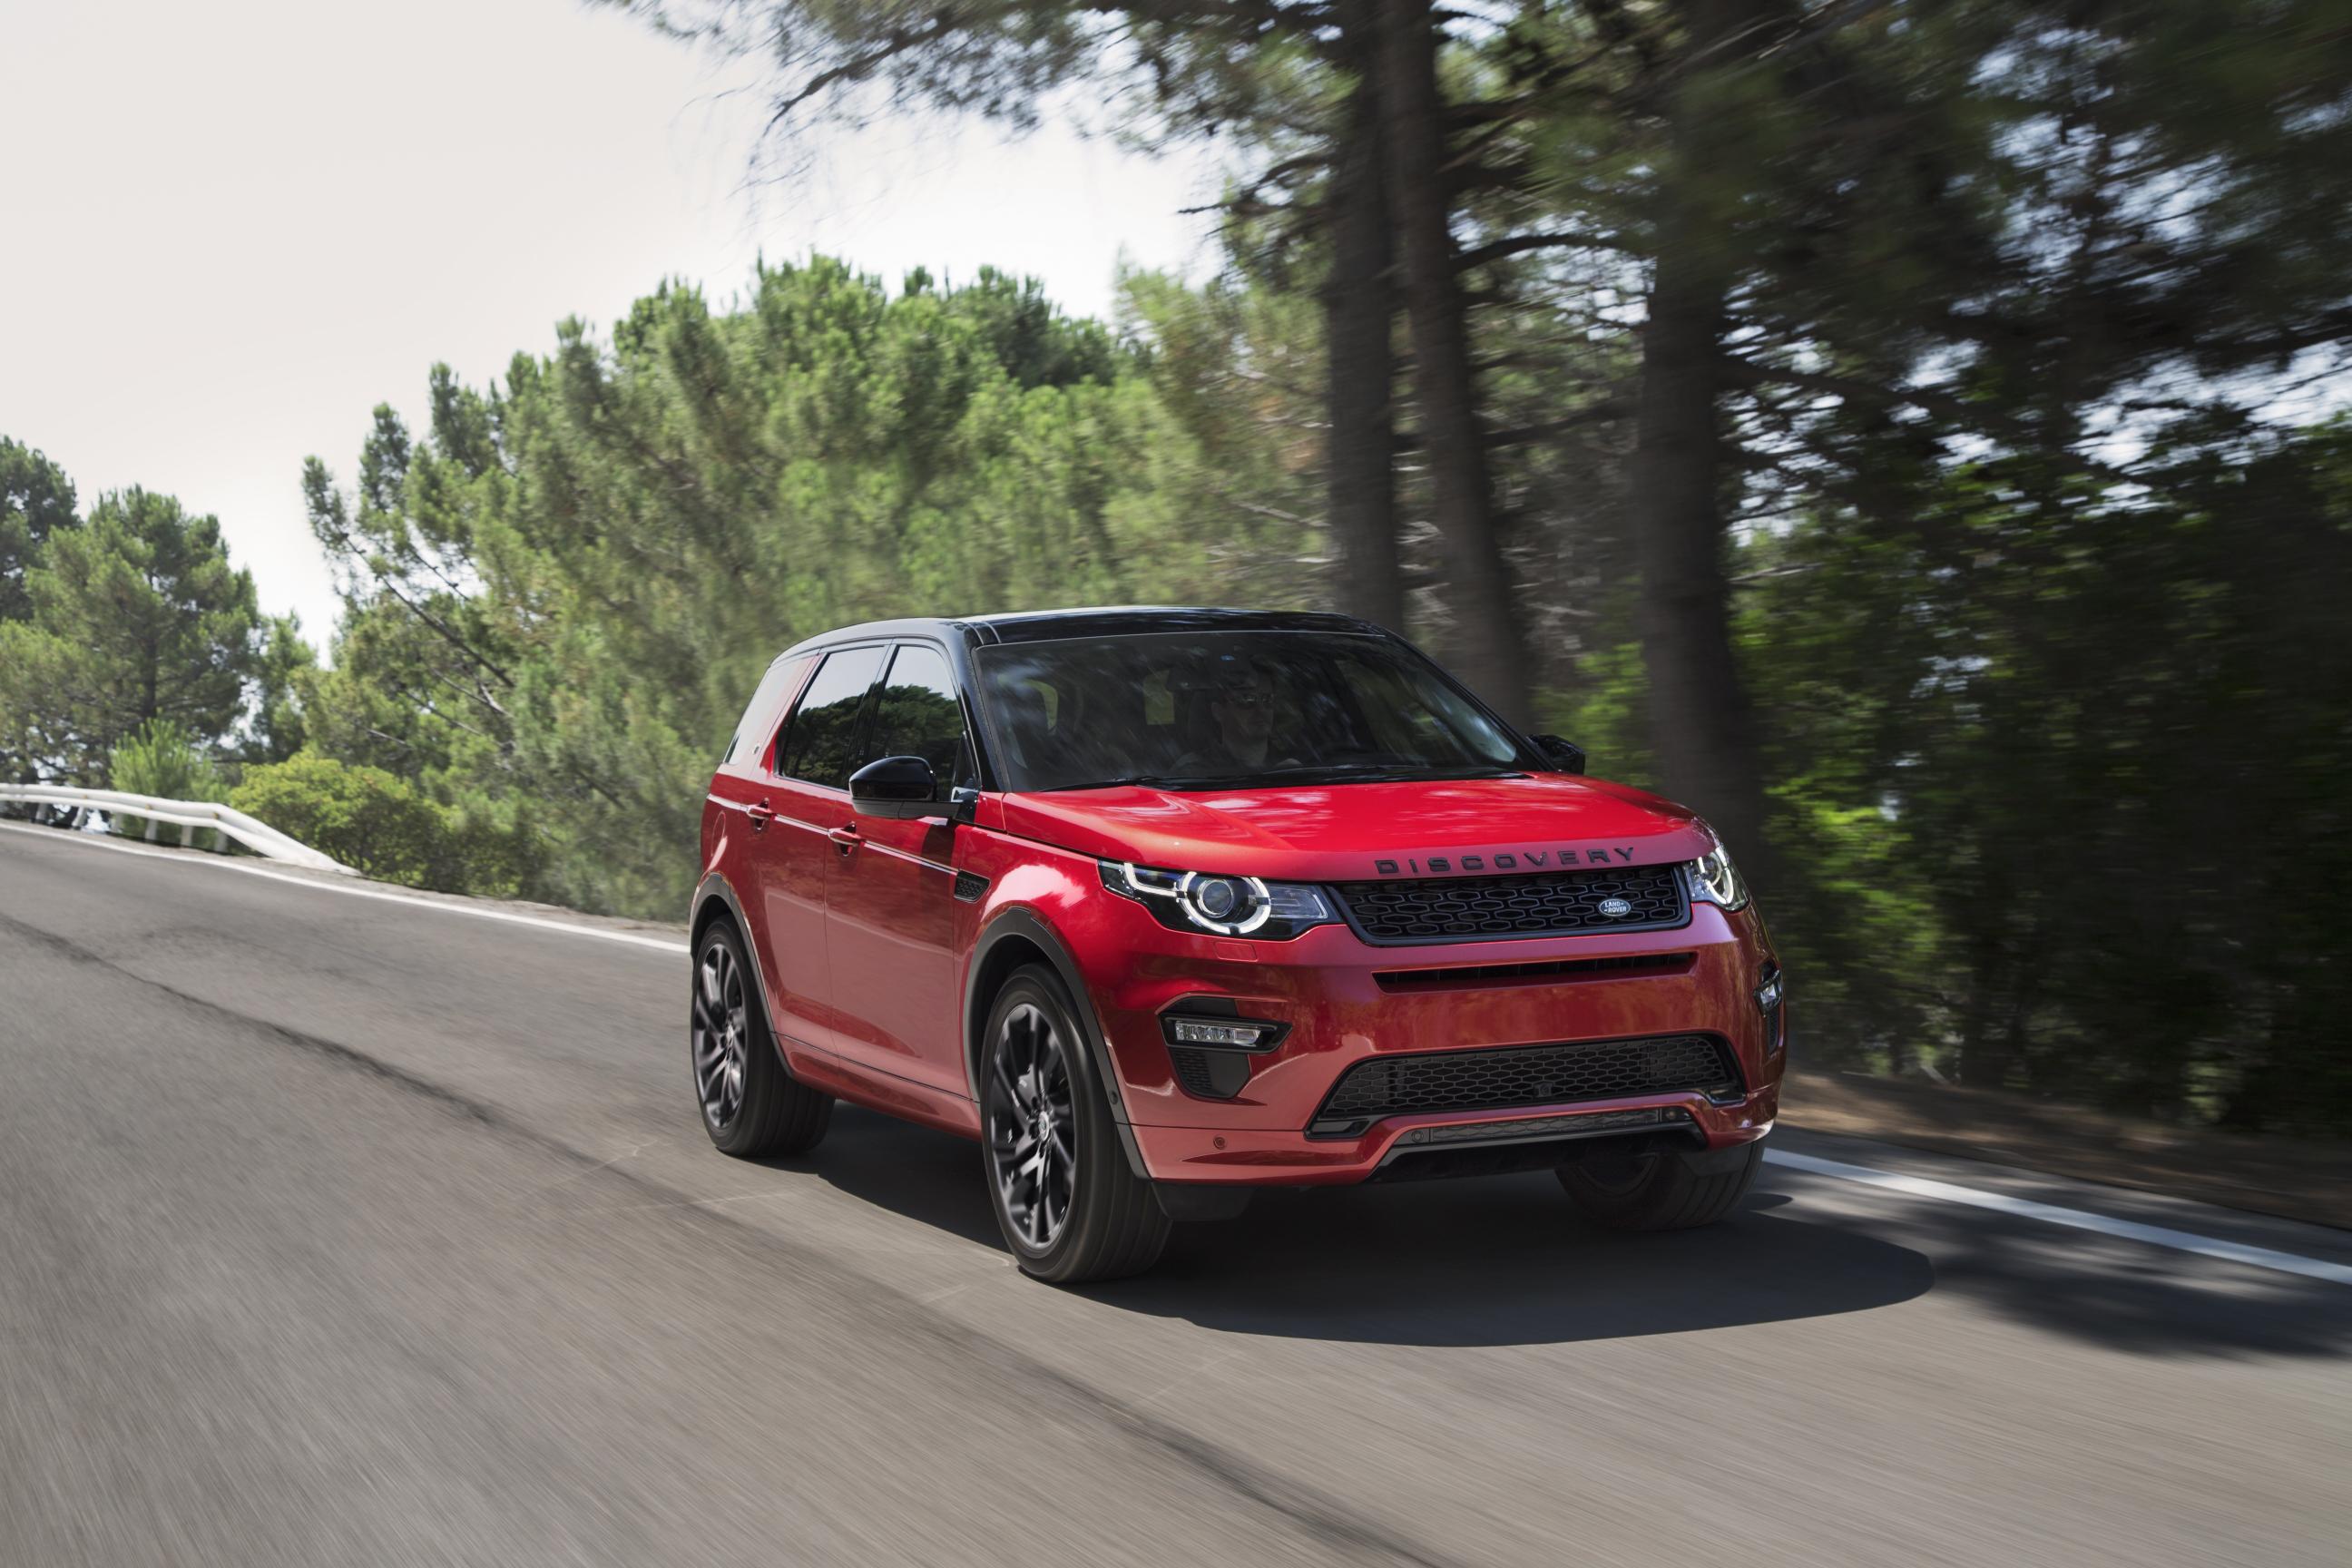 Red Land Rover Discovery Sport driving towards the right along a tree-lined road.